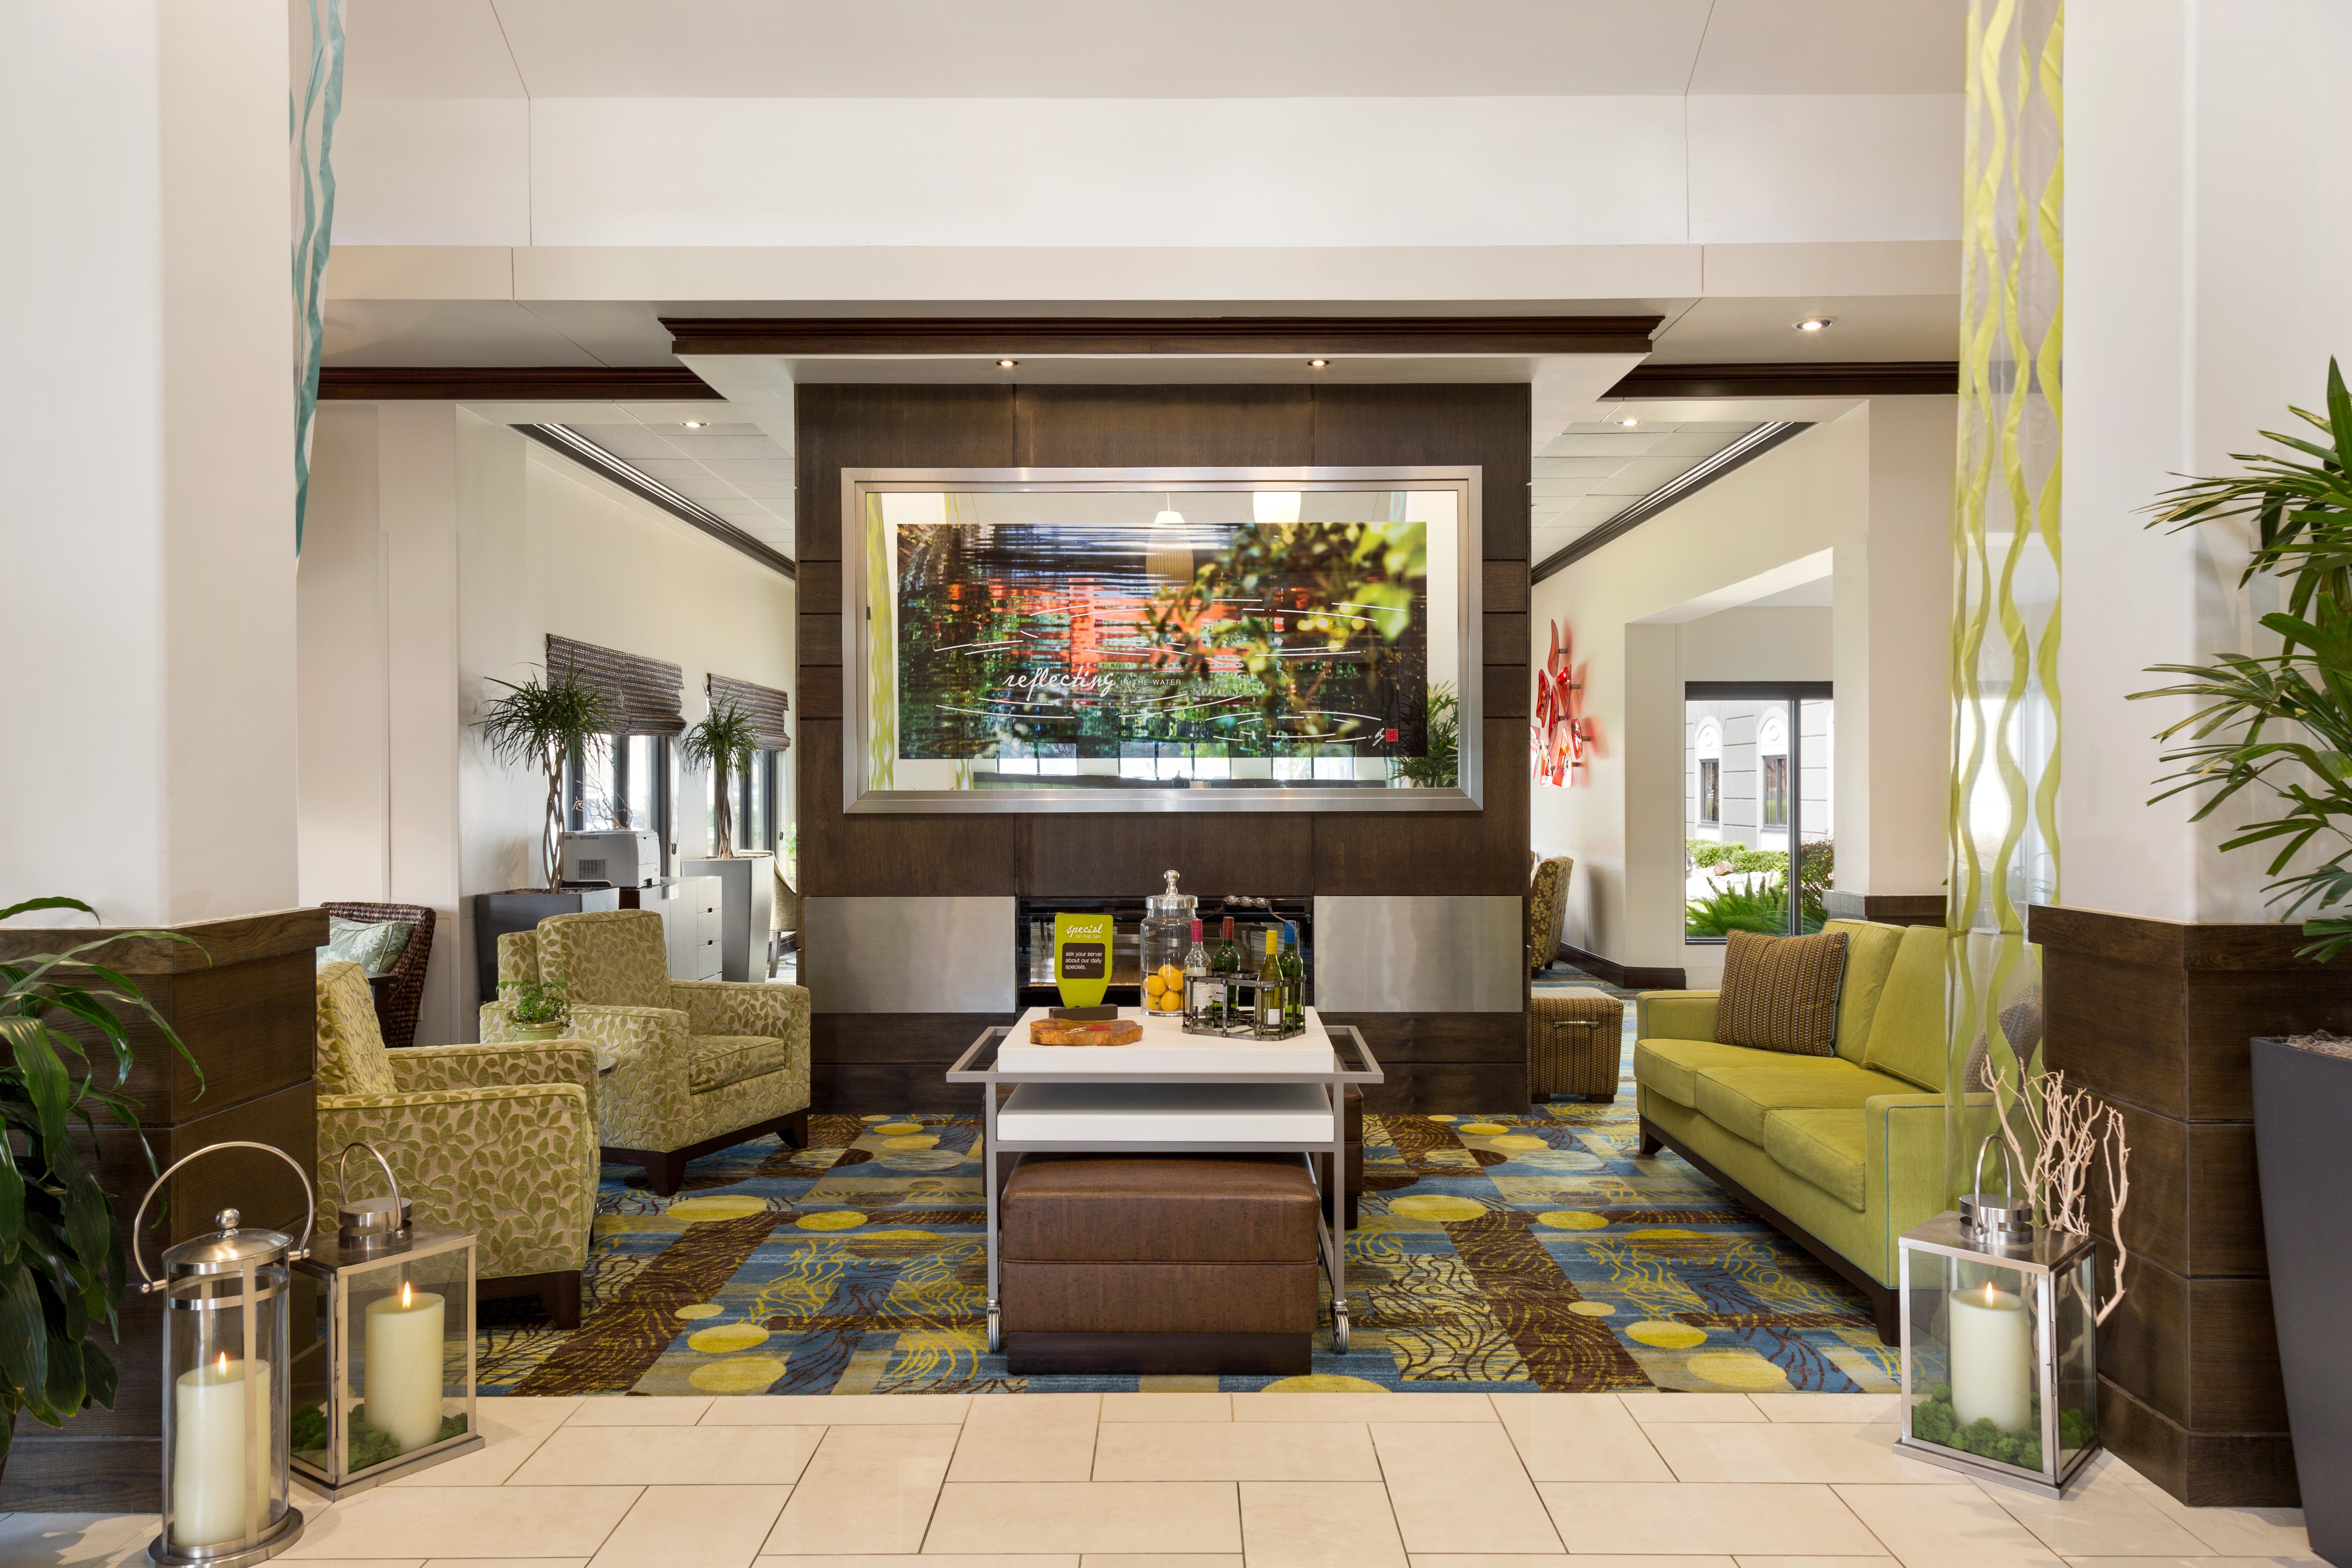 Lobby Hospitality Lounge Area By Fireplace With Art Feature, Soft Seating, and Beverage Station